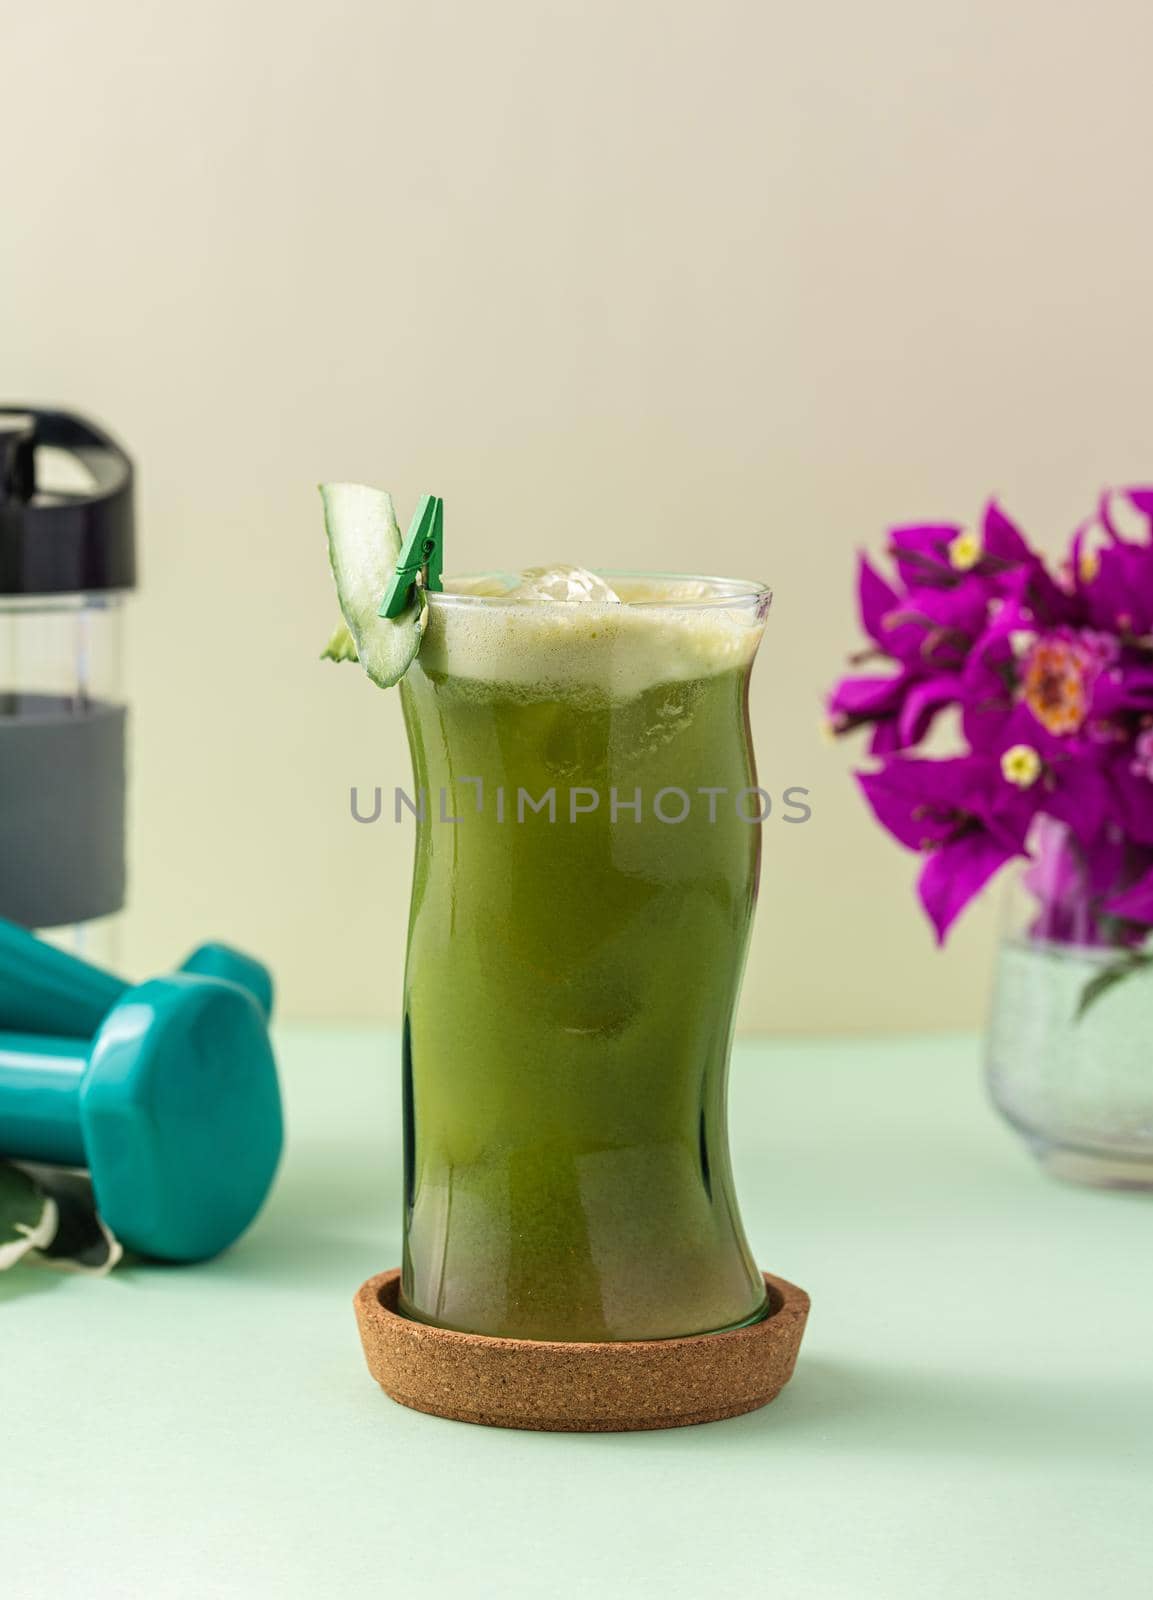 Vegetable smoothie, healthy organic juice made from celery, green apples, leaves of spinach and young carrot. Glass of green juice.